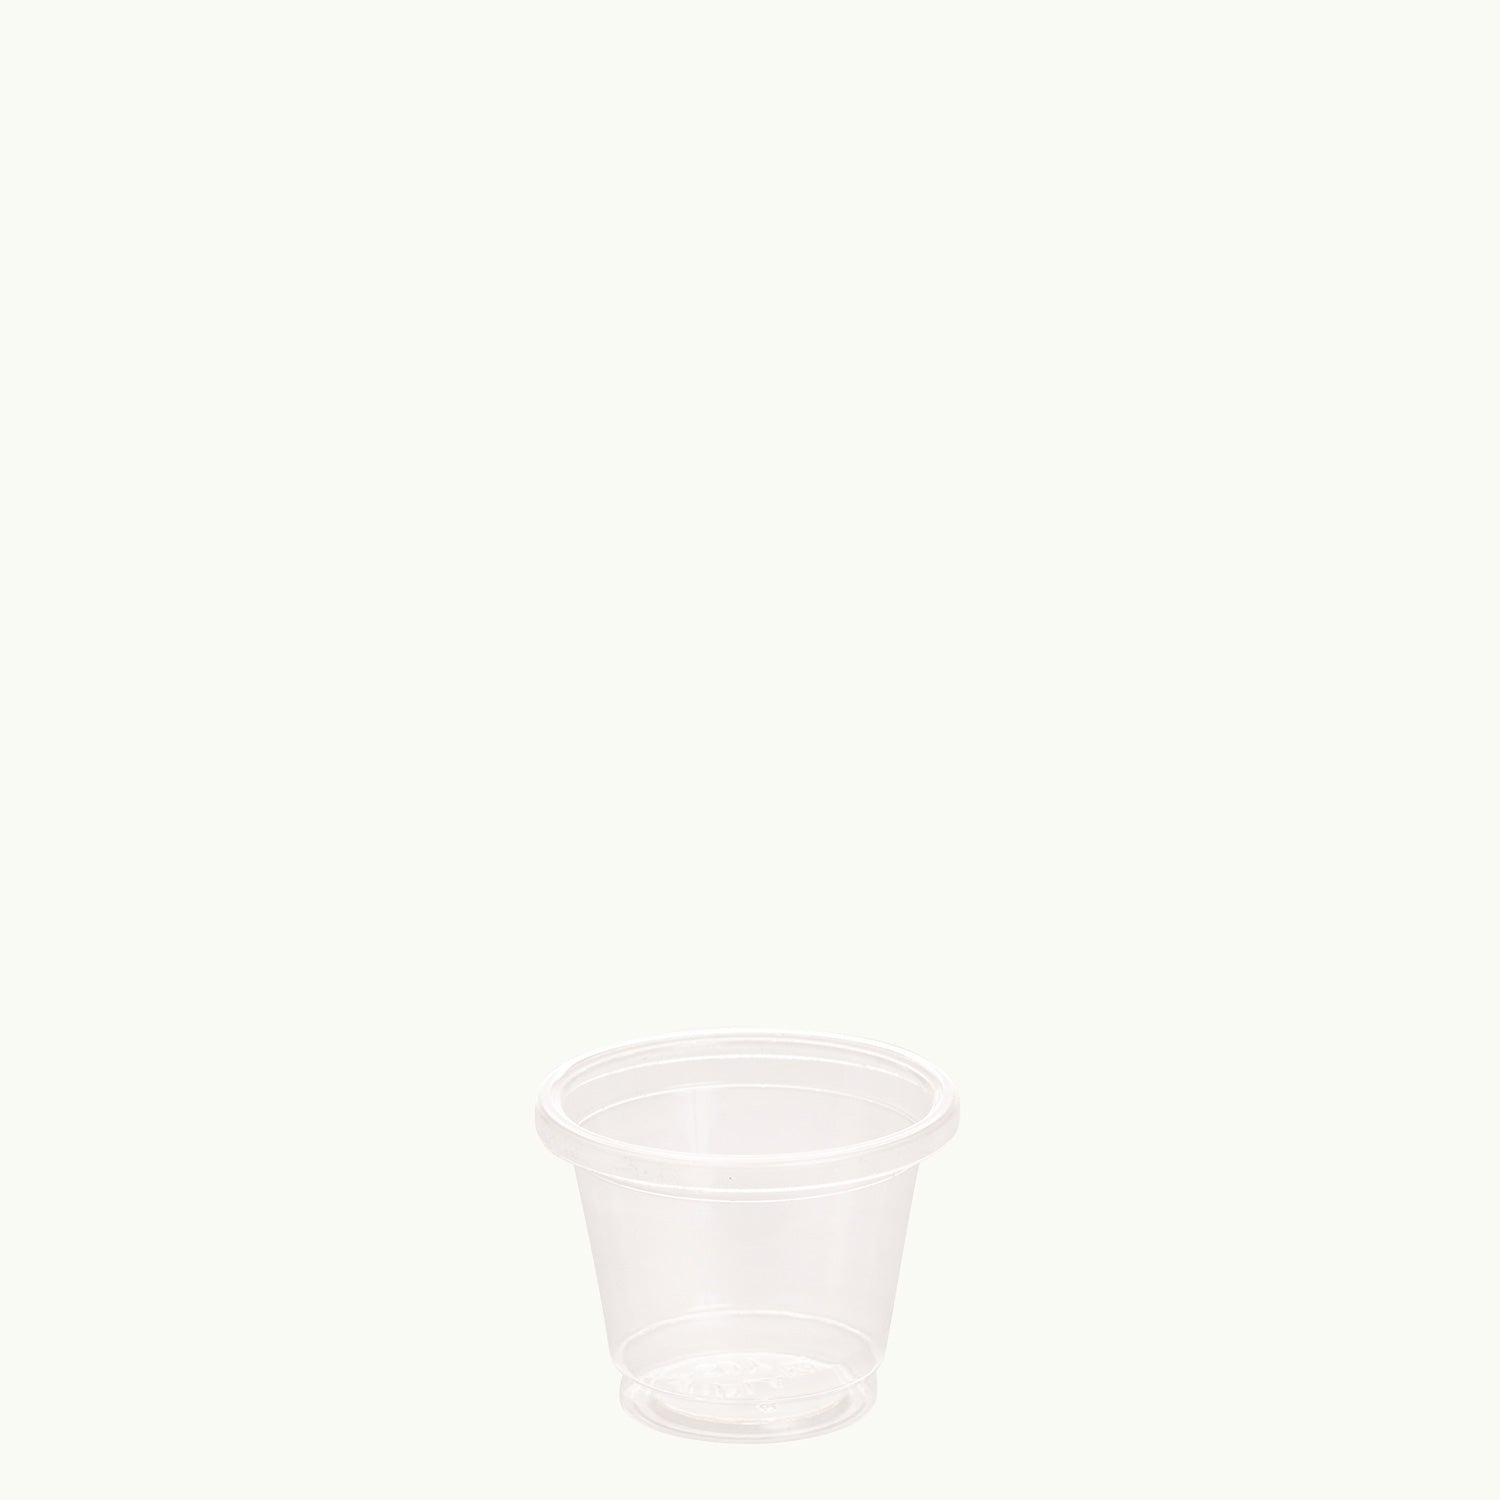 PLA sample cup. Eco-friendly sampling cup.